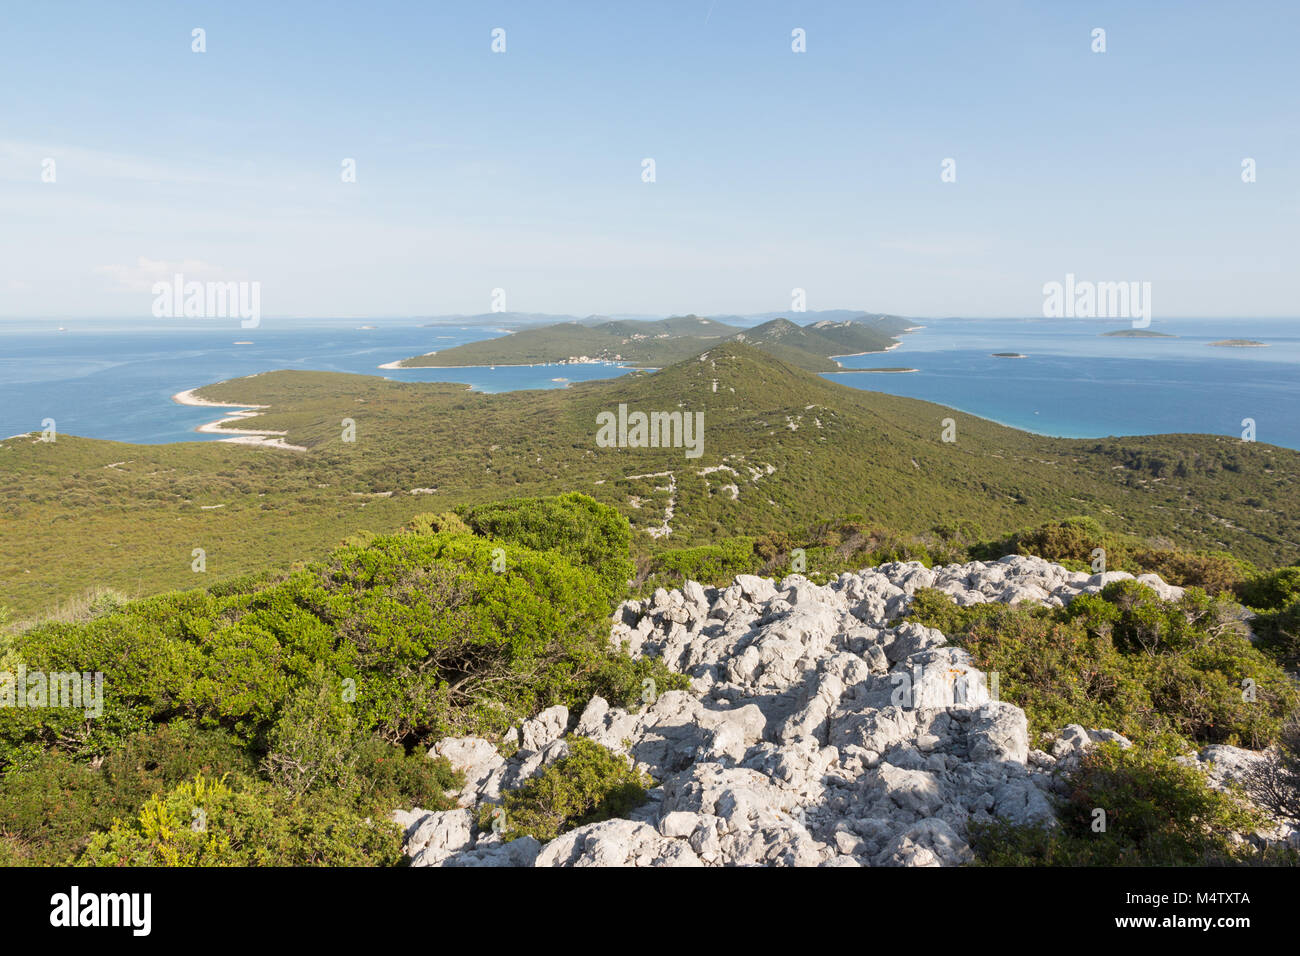 View from forested hill onIst island towards Molat island with blue water and clear sky Stock Photo